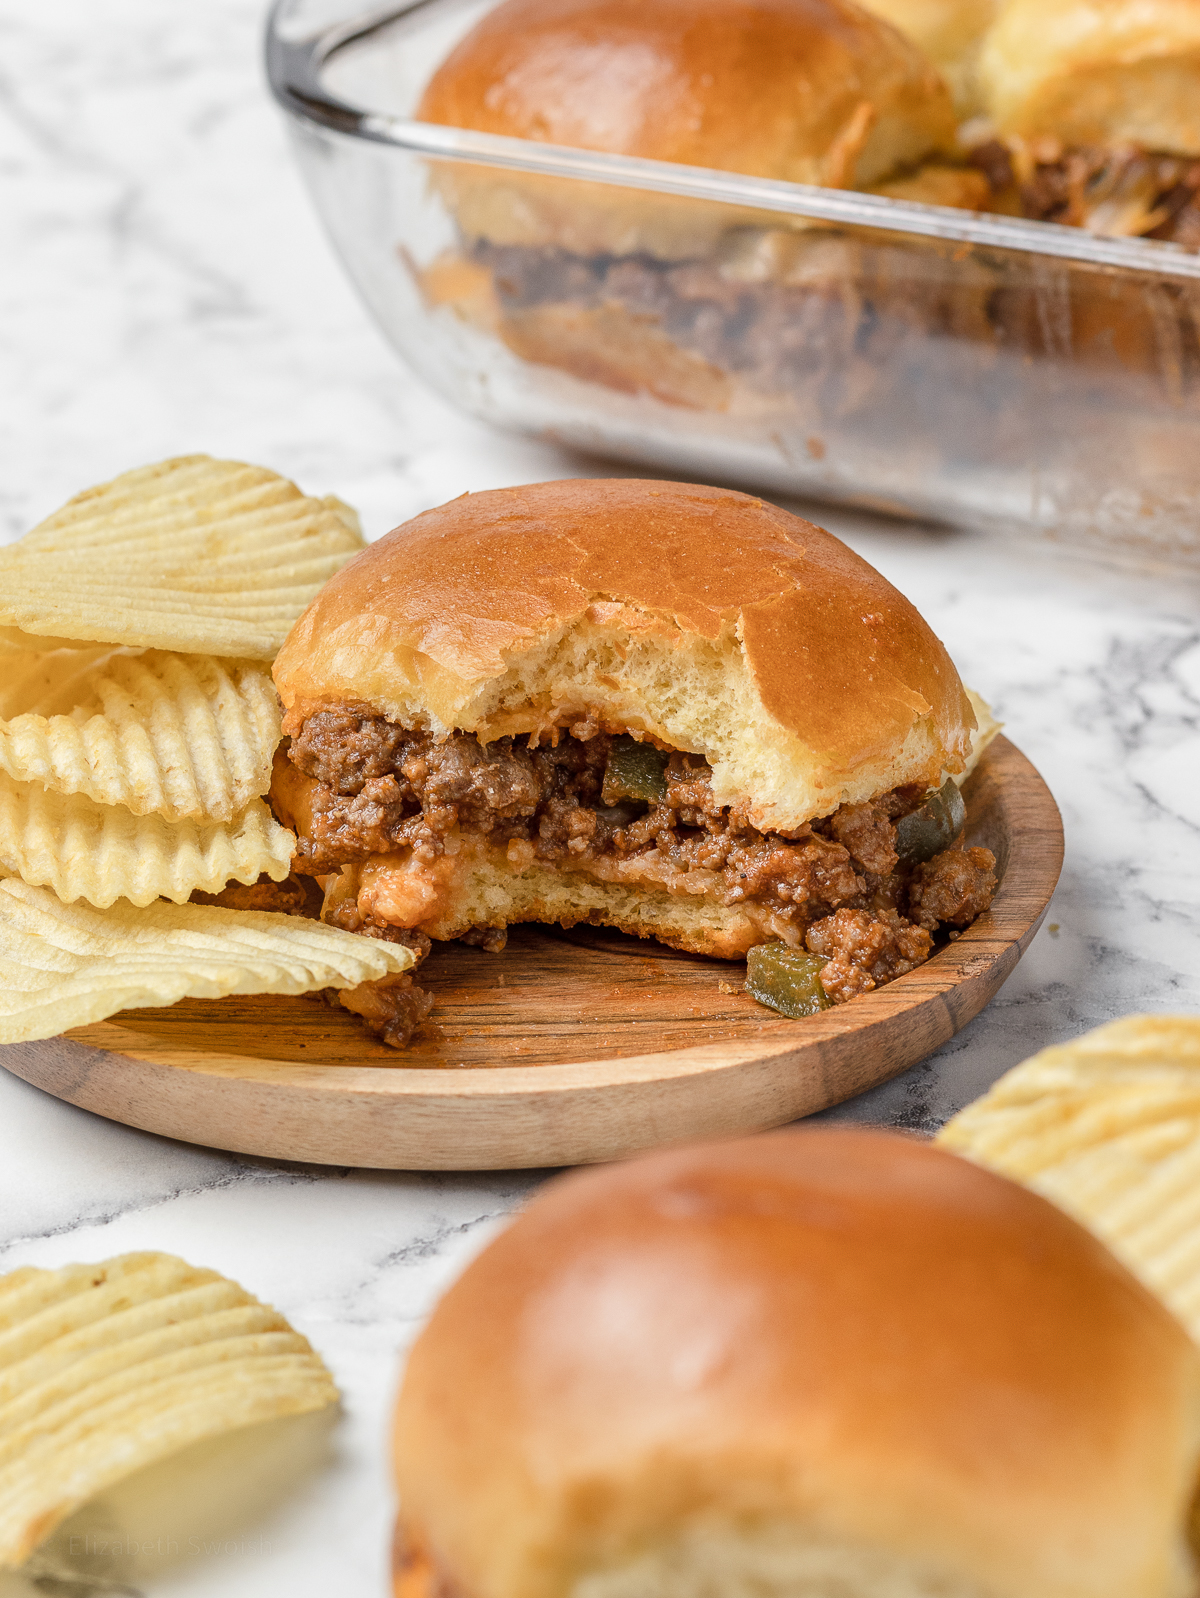 Sloppy joe that has one bite taken from it and chips on the side.